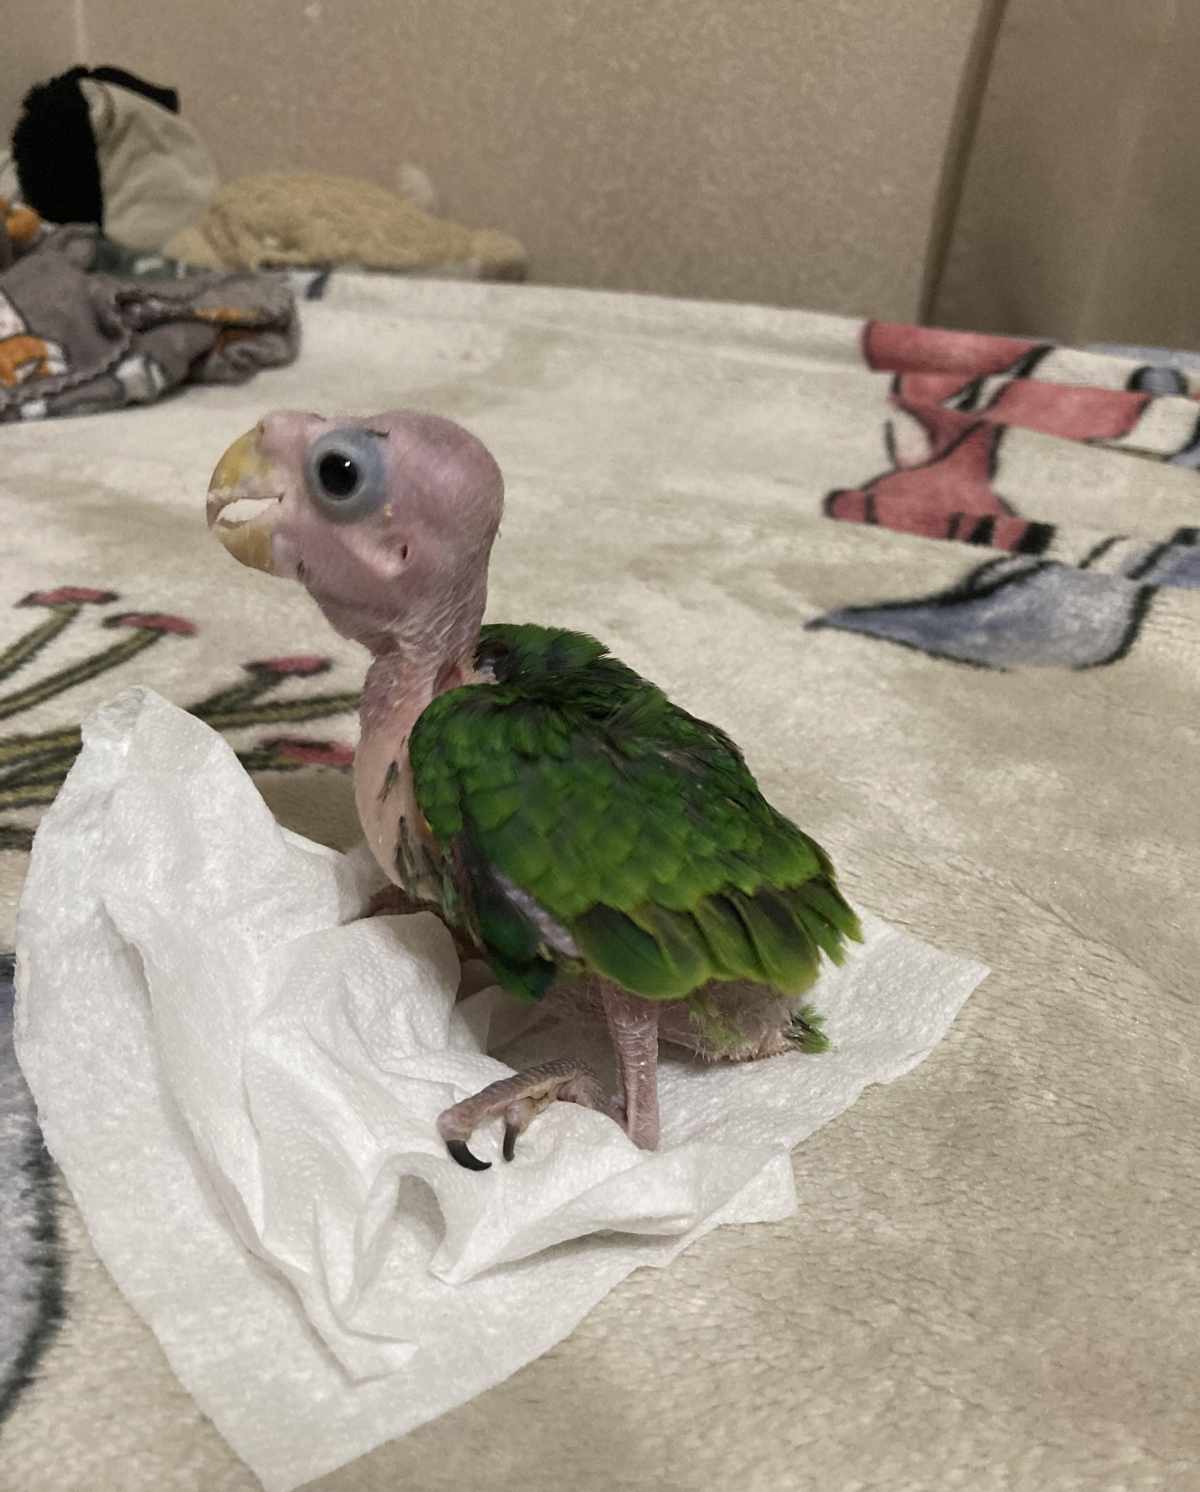 Got a new parrot and it reminded me of a certain Spider-Man villain